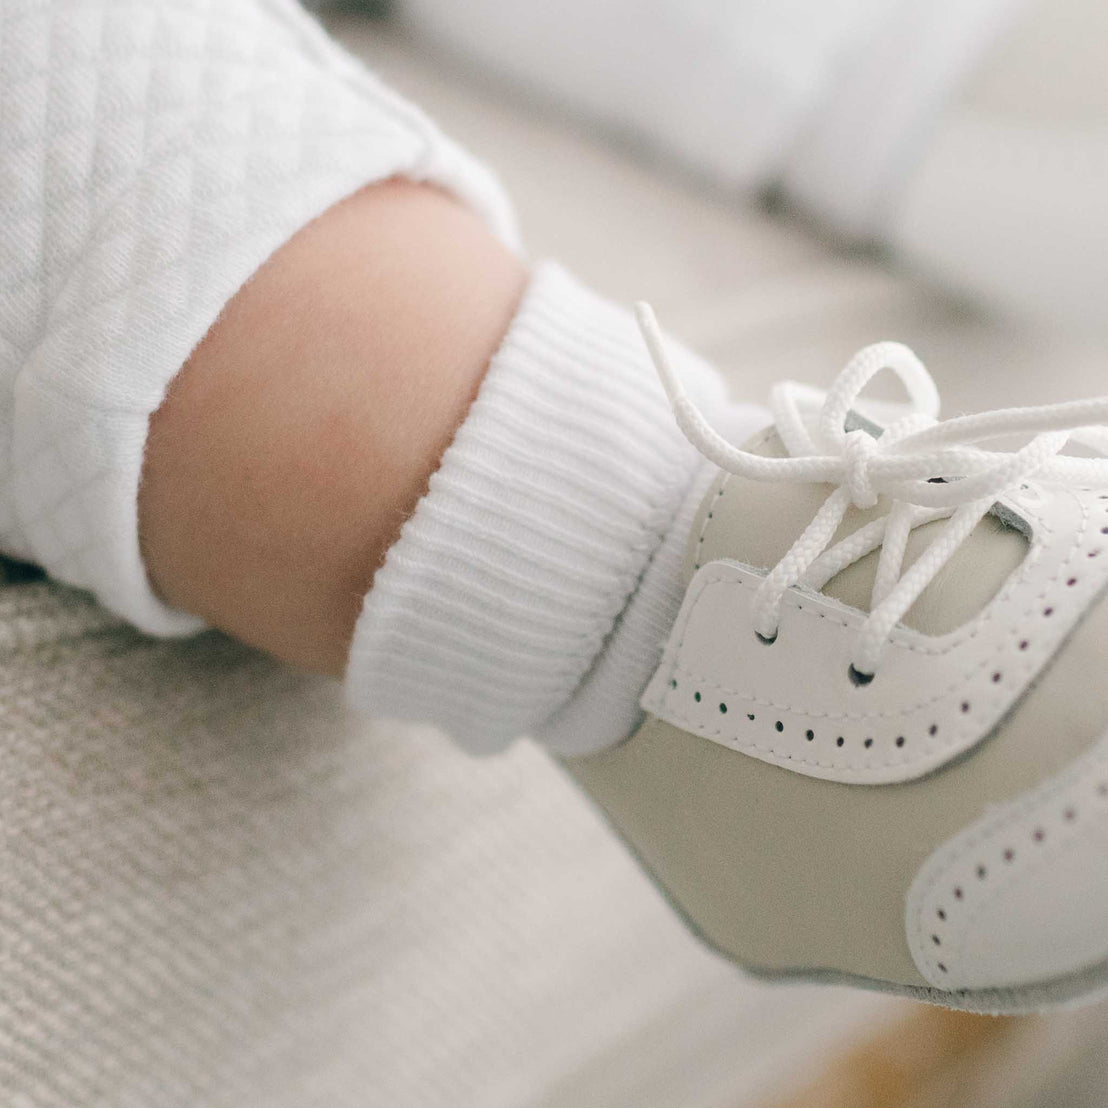 Close-up of a baby's foot clad in a Boys Simple Socks in white and the Boys Ivory Two Tone Wingtip Shoes.